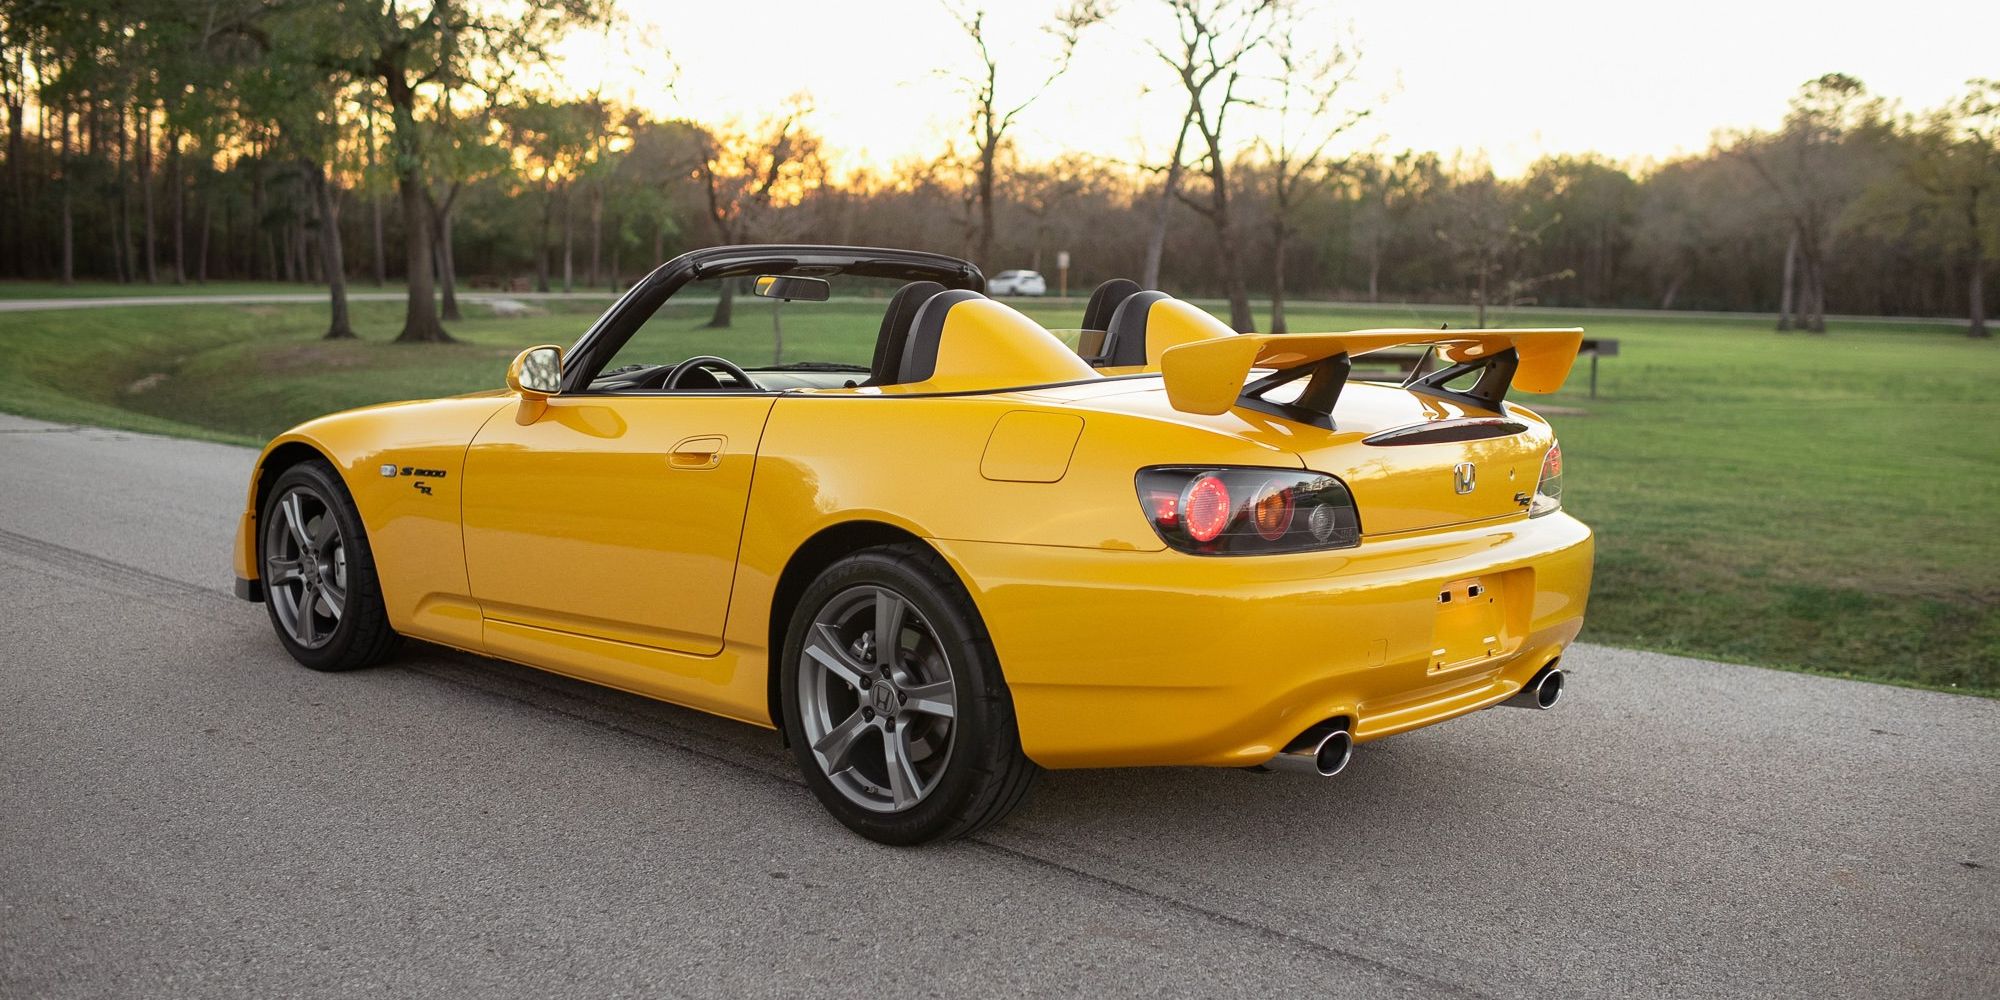 Rear 3/4 view of the S2000